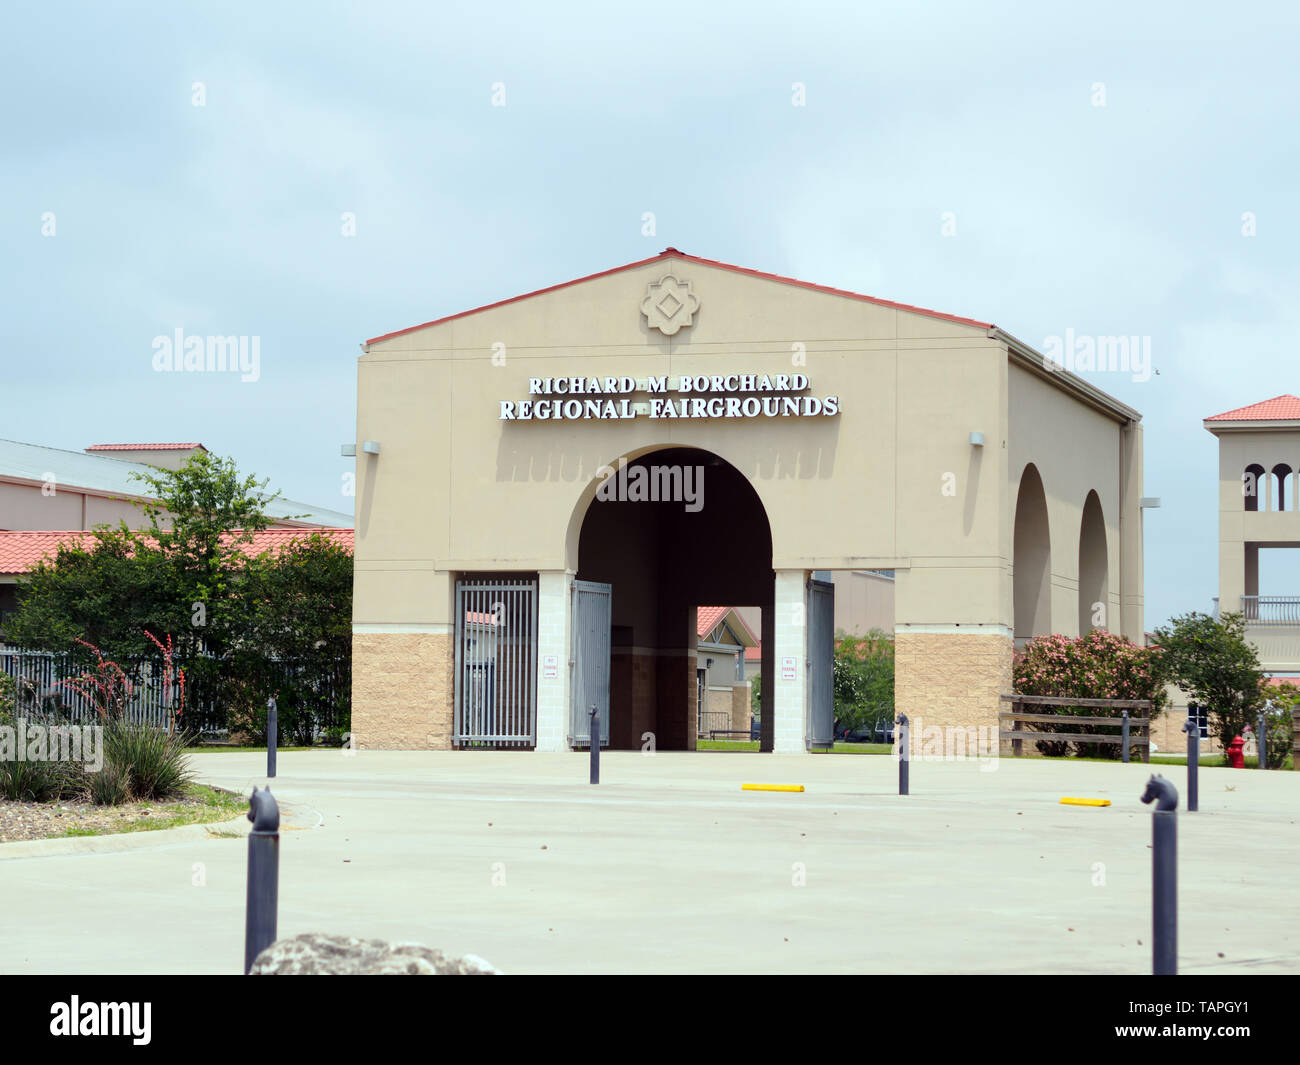 Entrance to the Richard M. Borchard Regional Fairgrounds in Robstown, Texas USA. Stock Photo